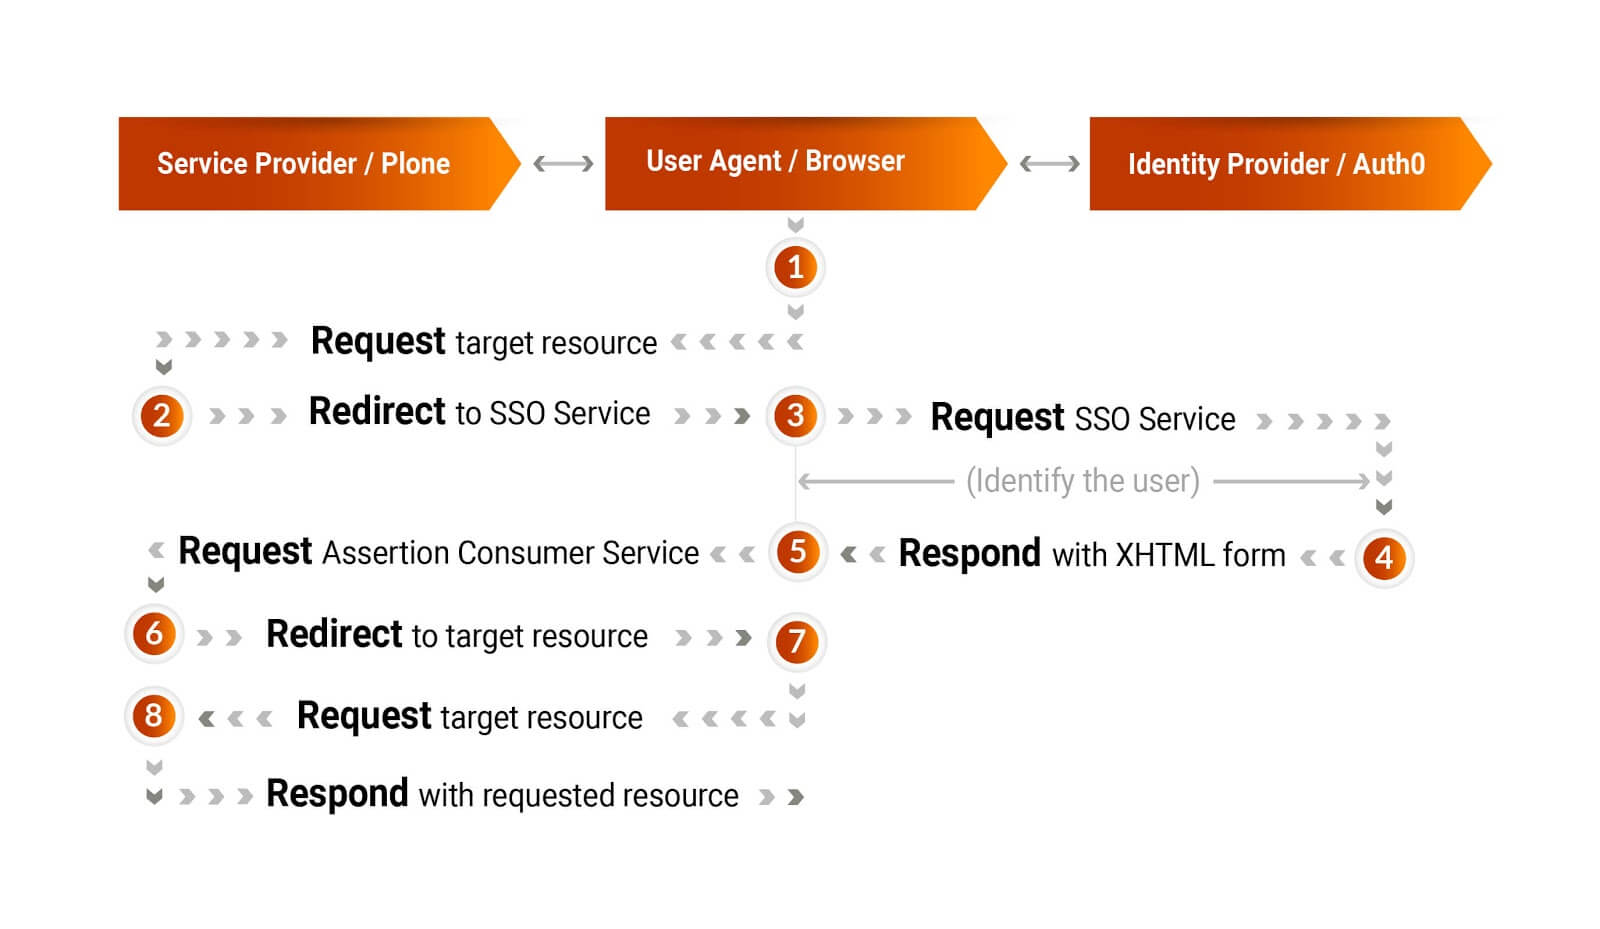 SAML2 workflow for service provide, user agent and identity provider